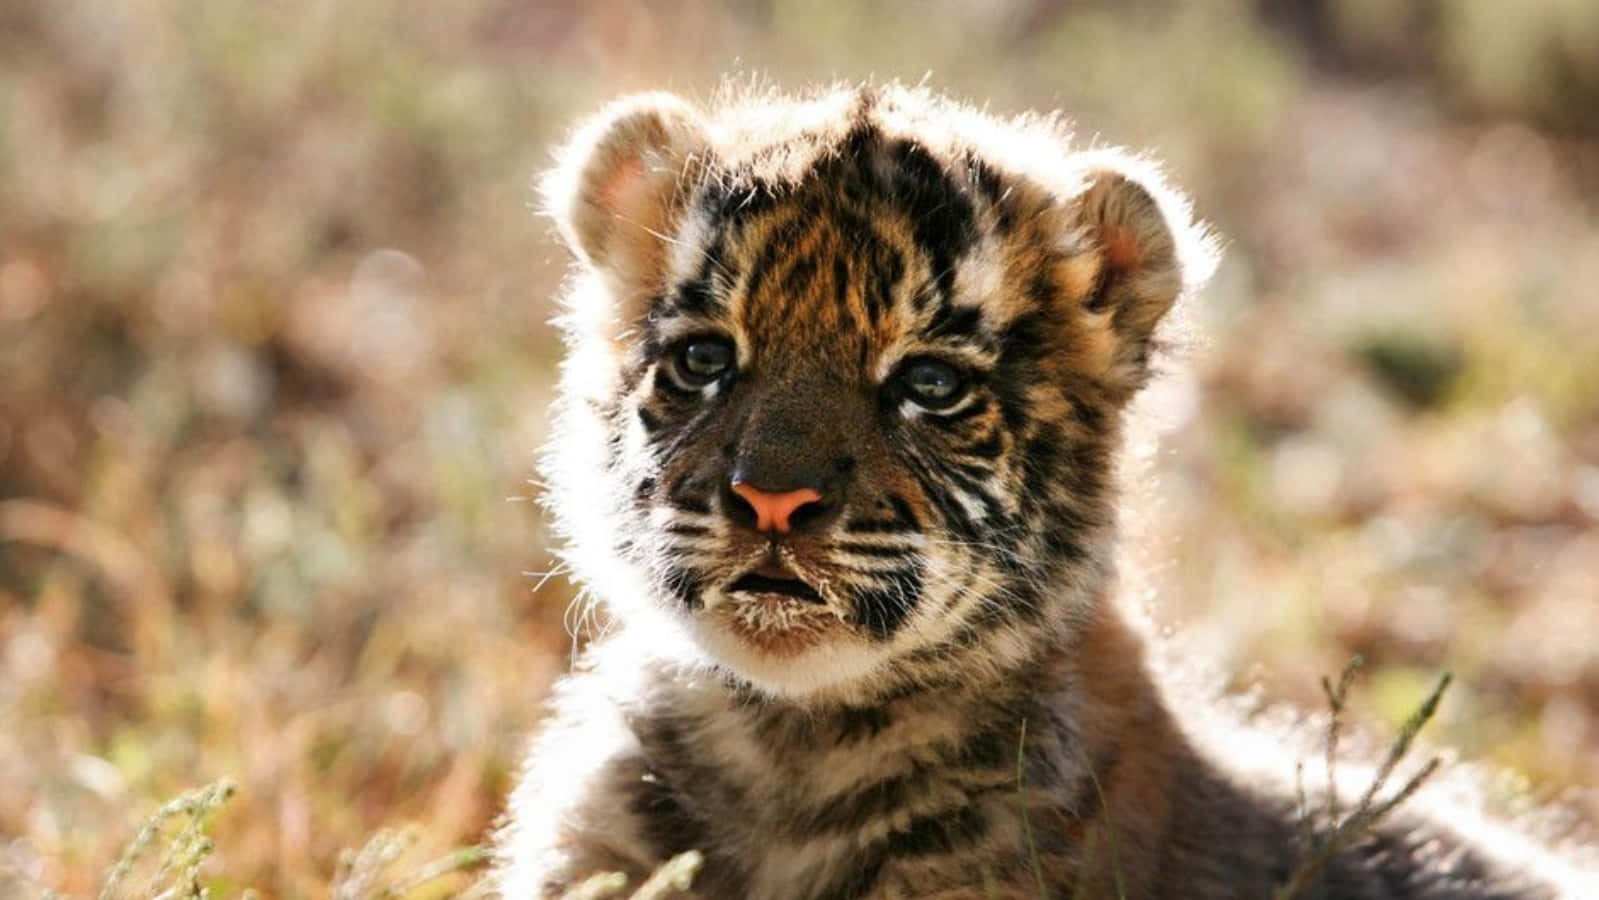 A Baby Tiger Relaxing in the Forest